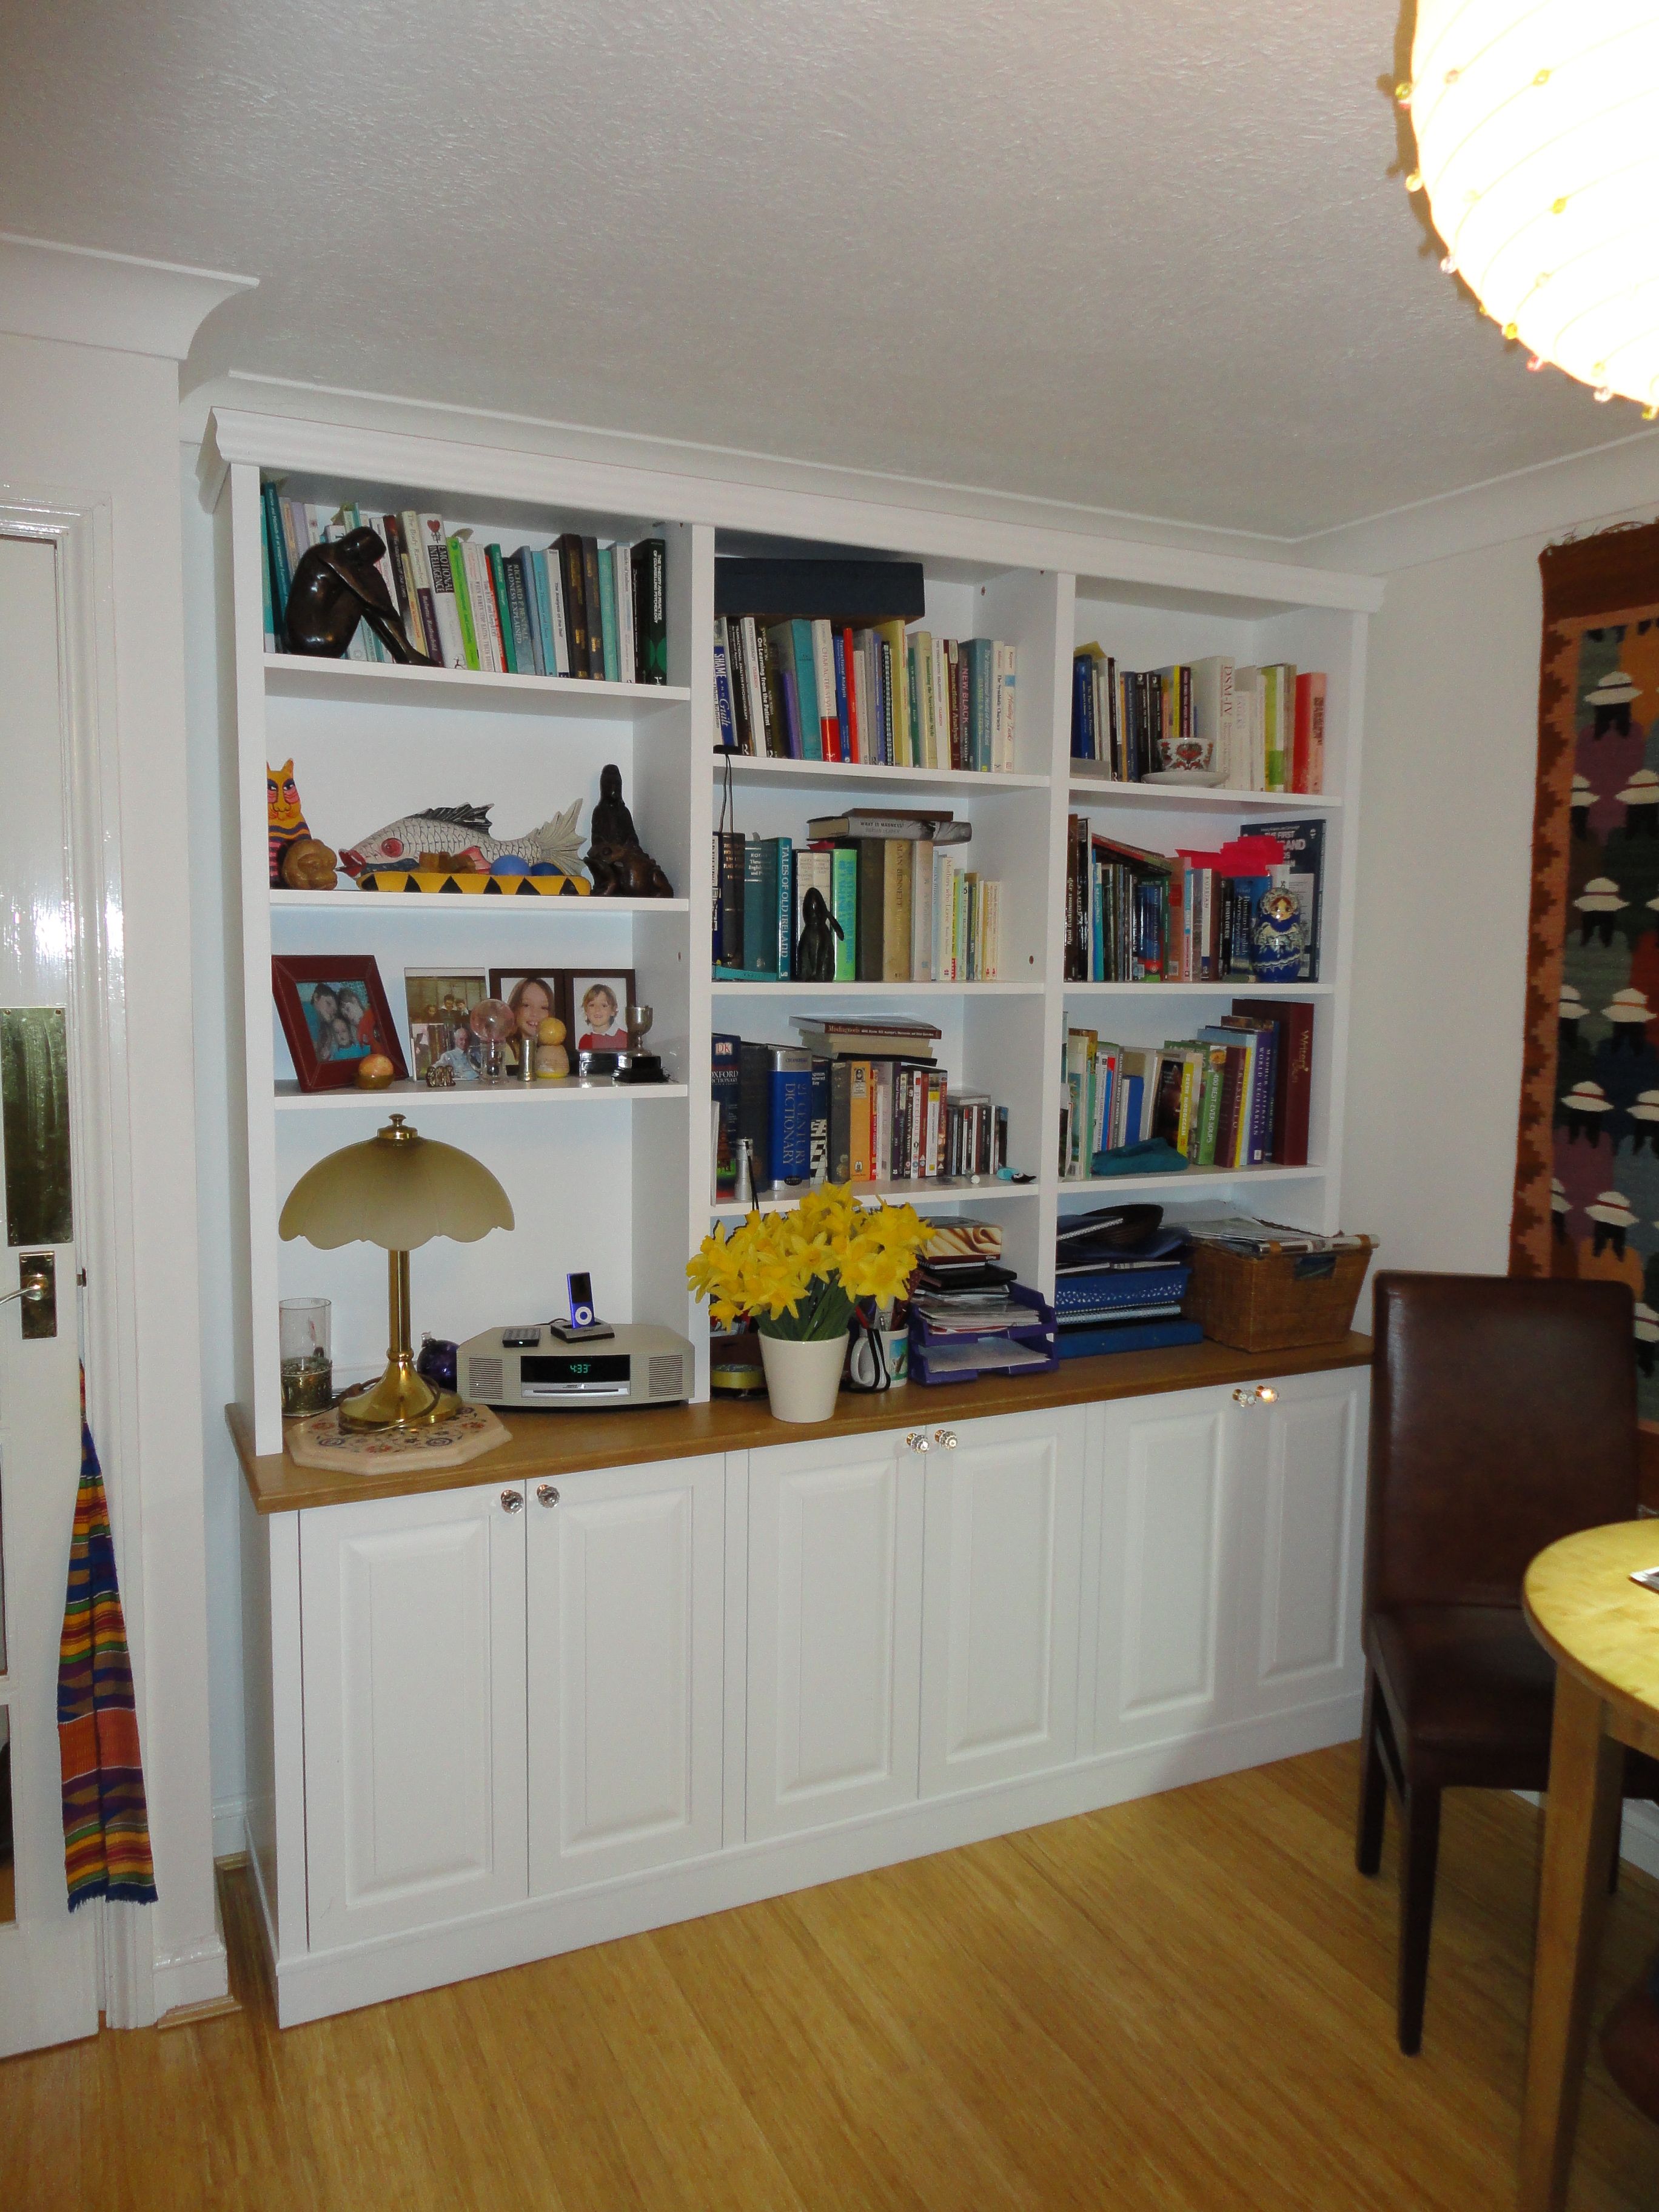 The Sussex Bookcase Company Quality Handmade Storage Furniture Intended For Painted Oak Bookcase (View 6 of 15)